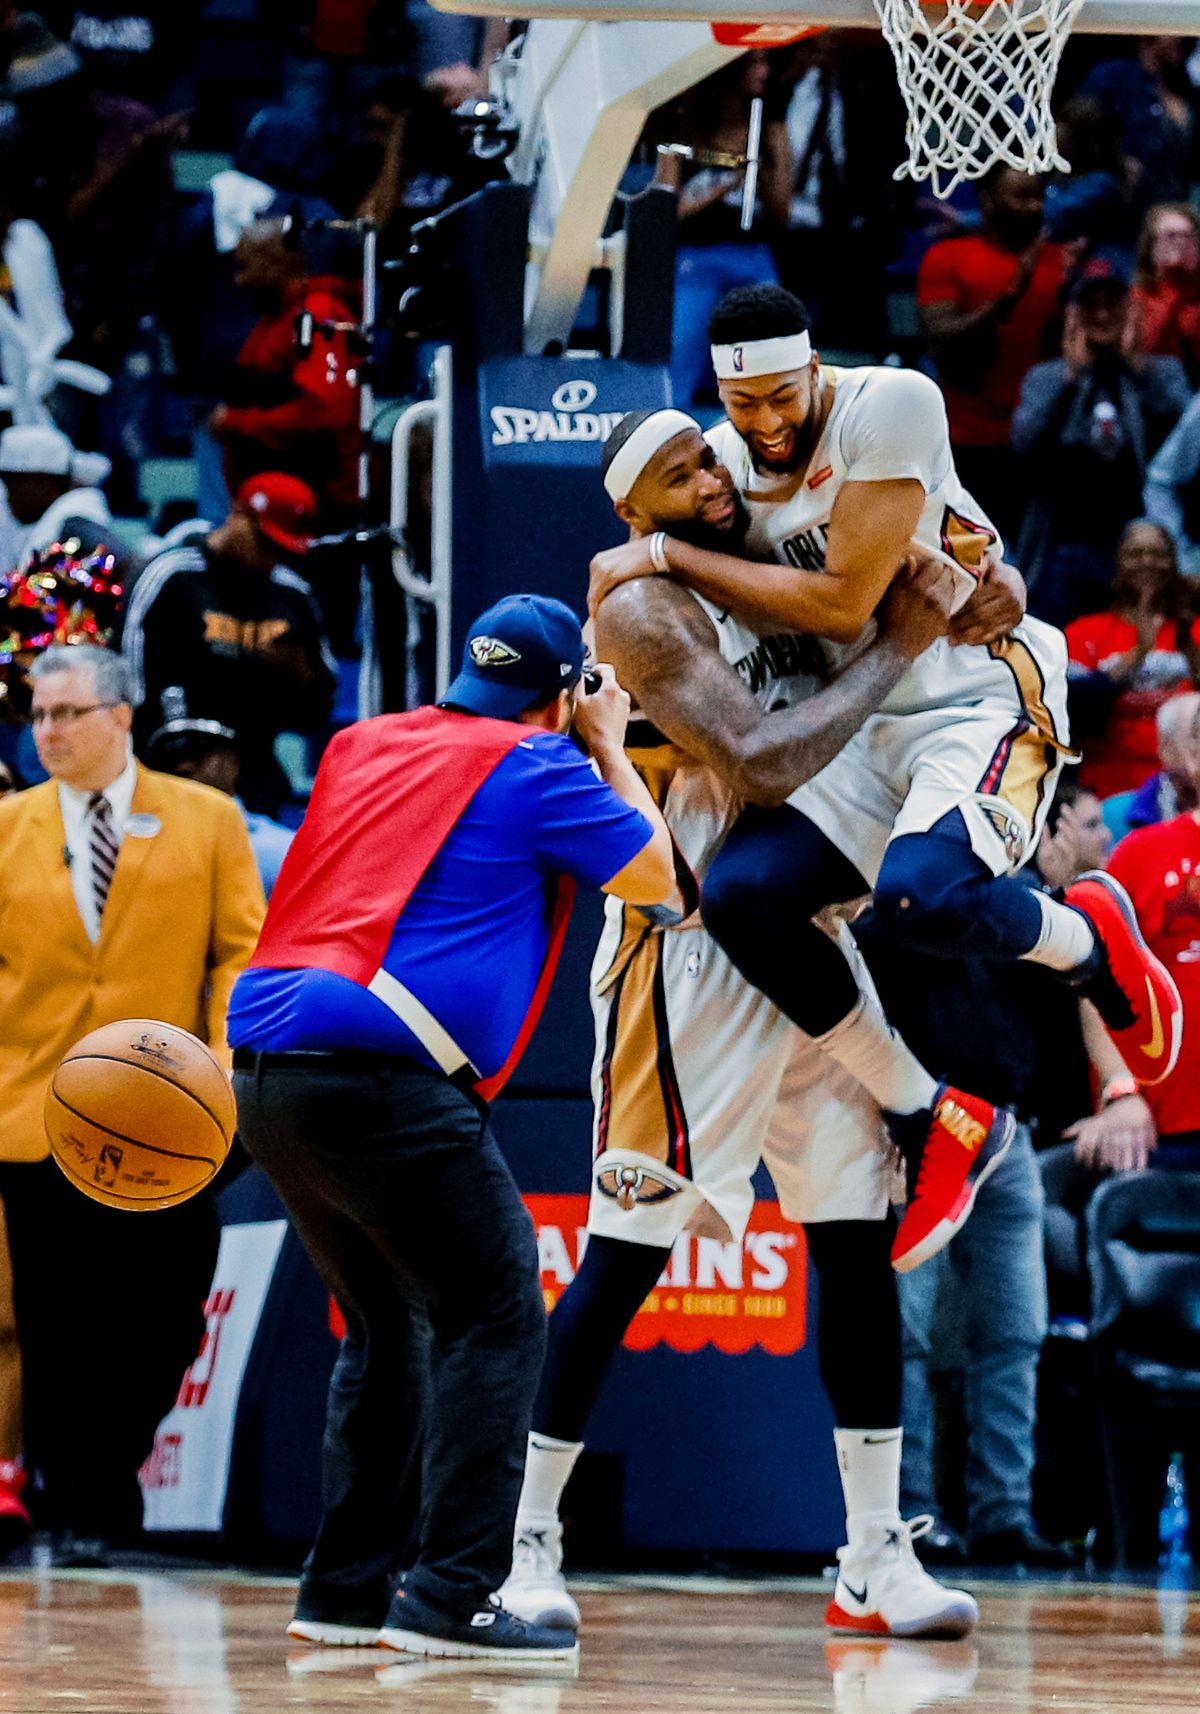 NBA: Chicago Bulls at New Orleans Pelicans